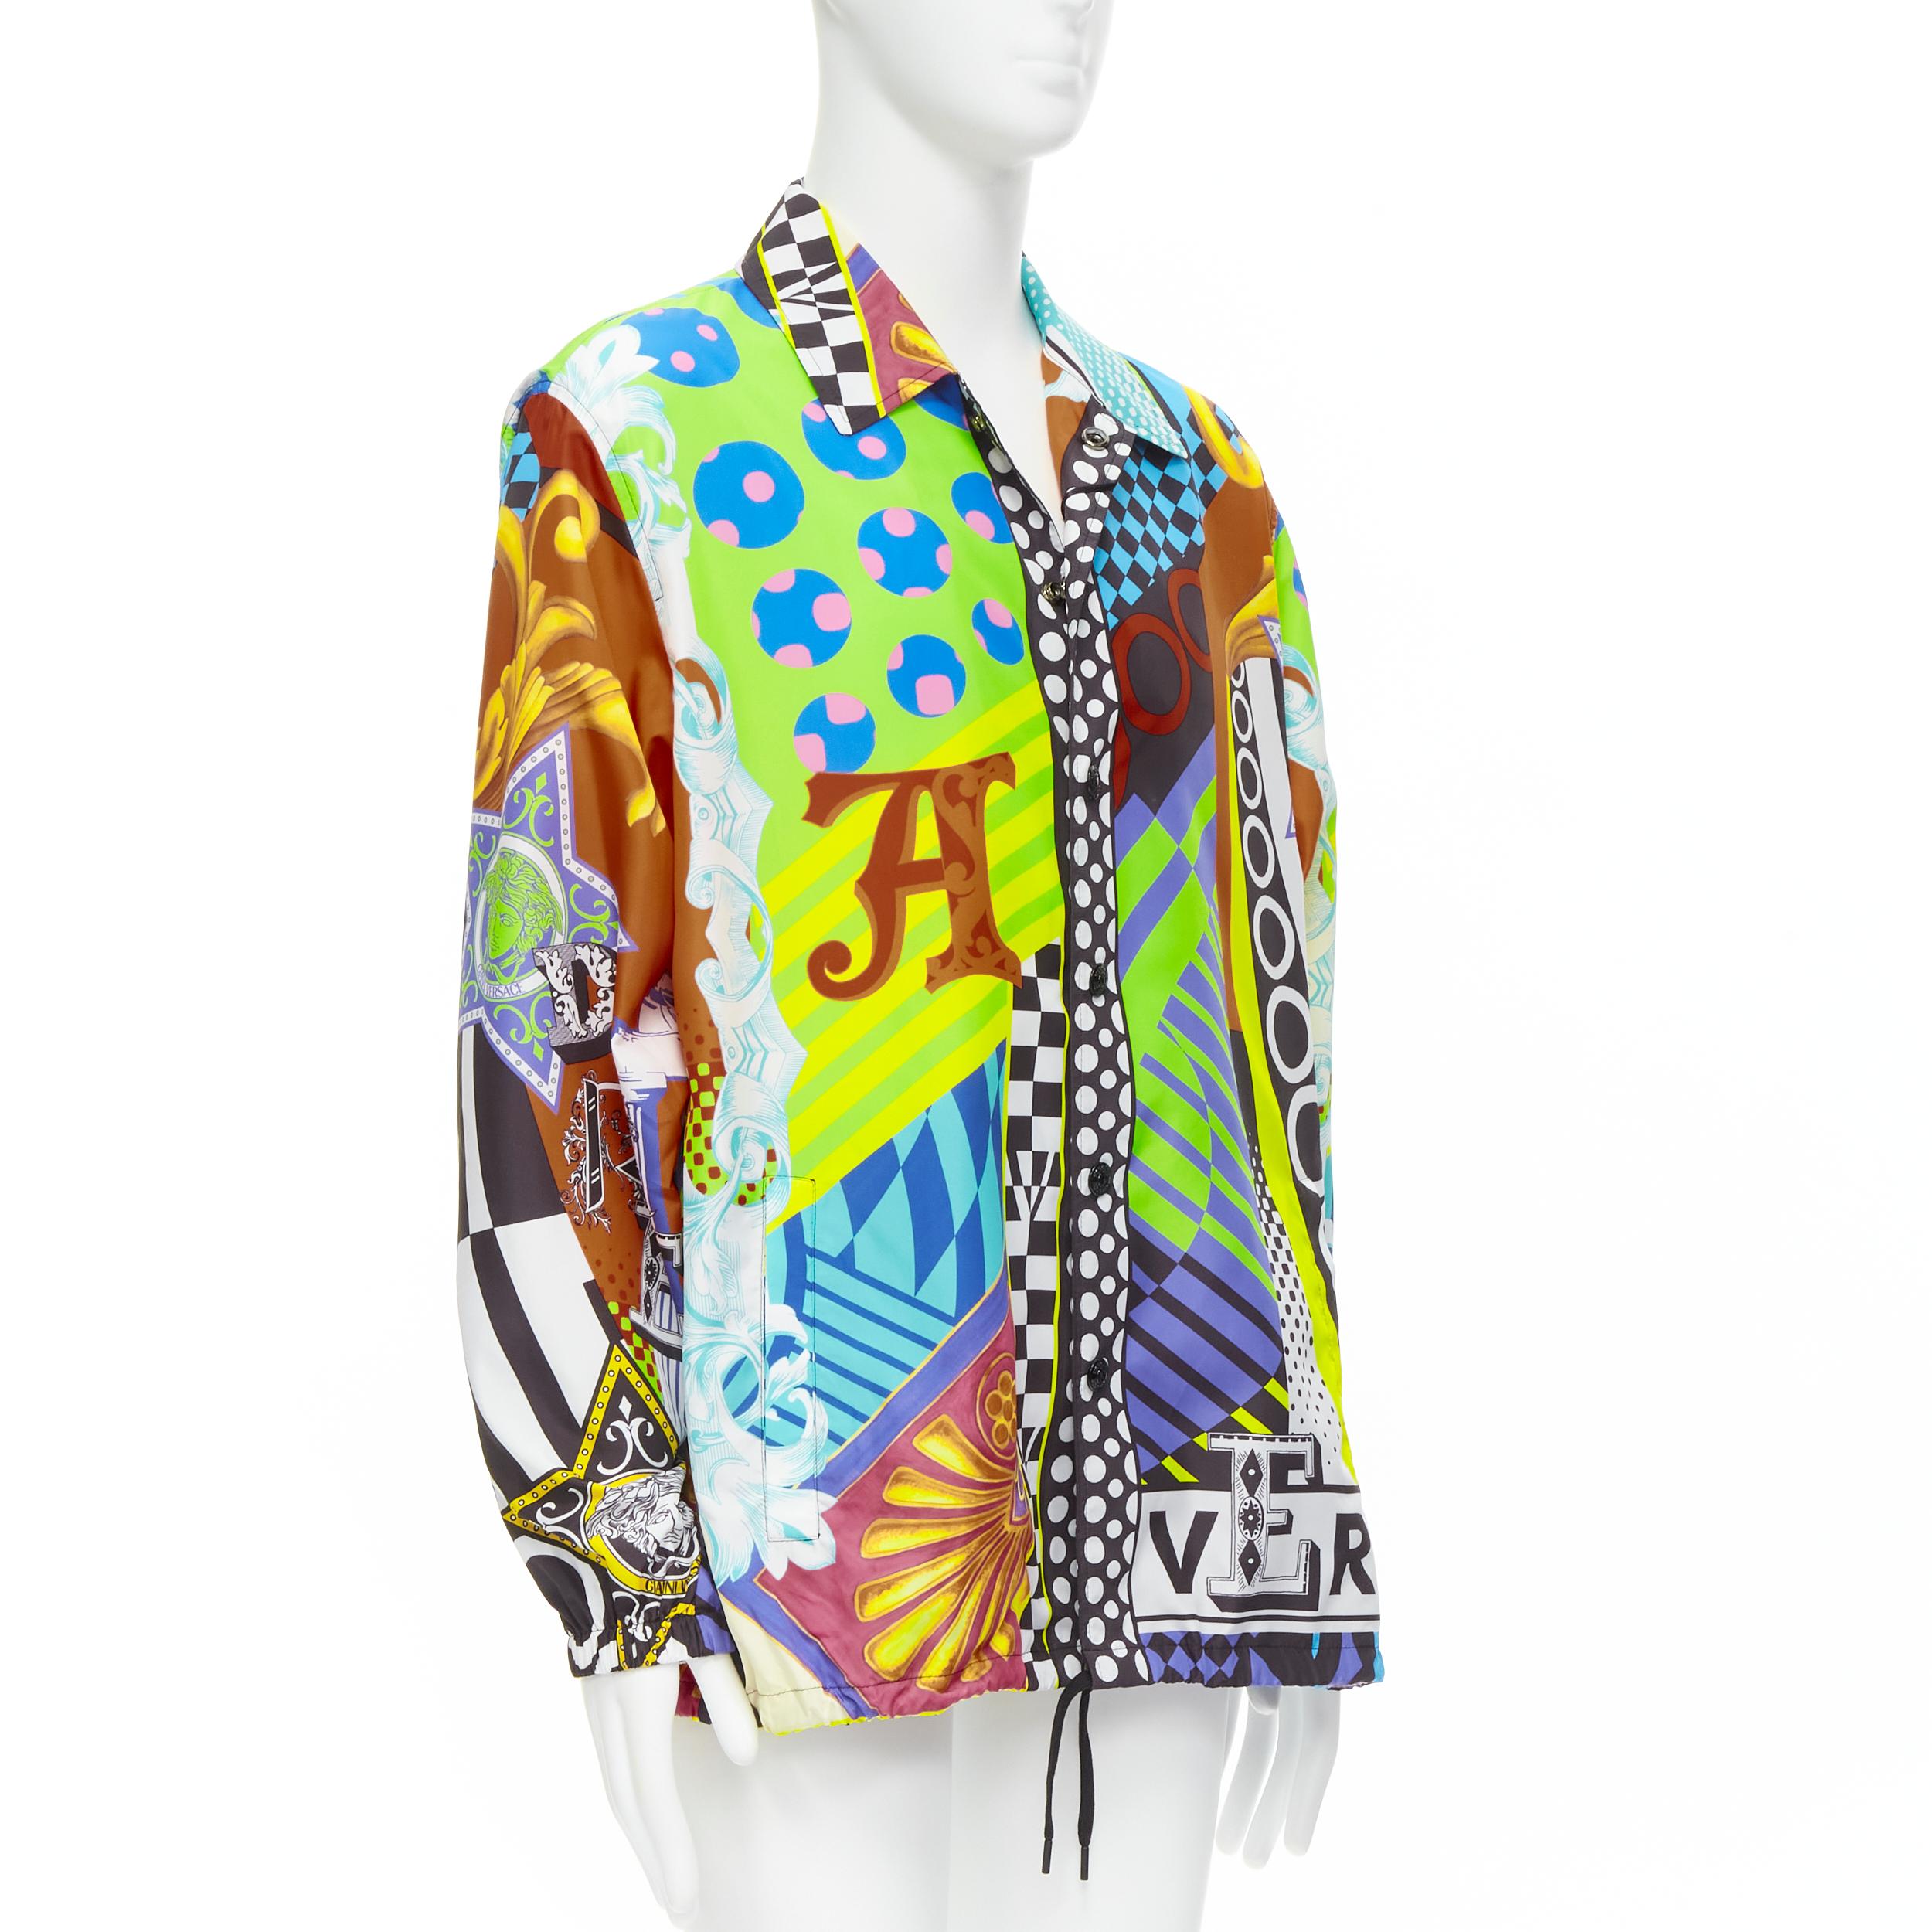 new VERSACE 2020 Runway Pop Temple nylon windbreaker over shirt jacket IT50 L
Reference: TGAS/C00012
Brand: Versace
Designer: Donatella Versace
Collection: Pop Temple Runway
Material: Nylon
Color: Multicolor
Pattern: Abstract
Closure: Button
Extra